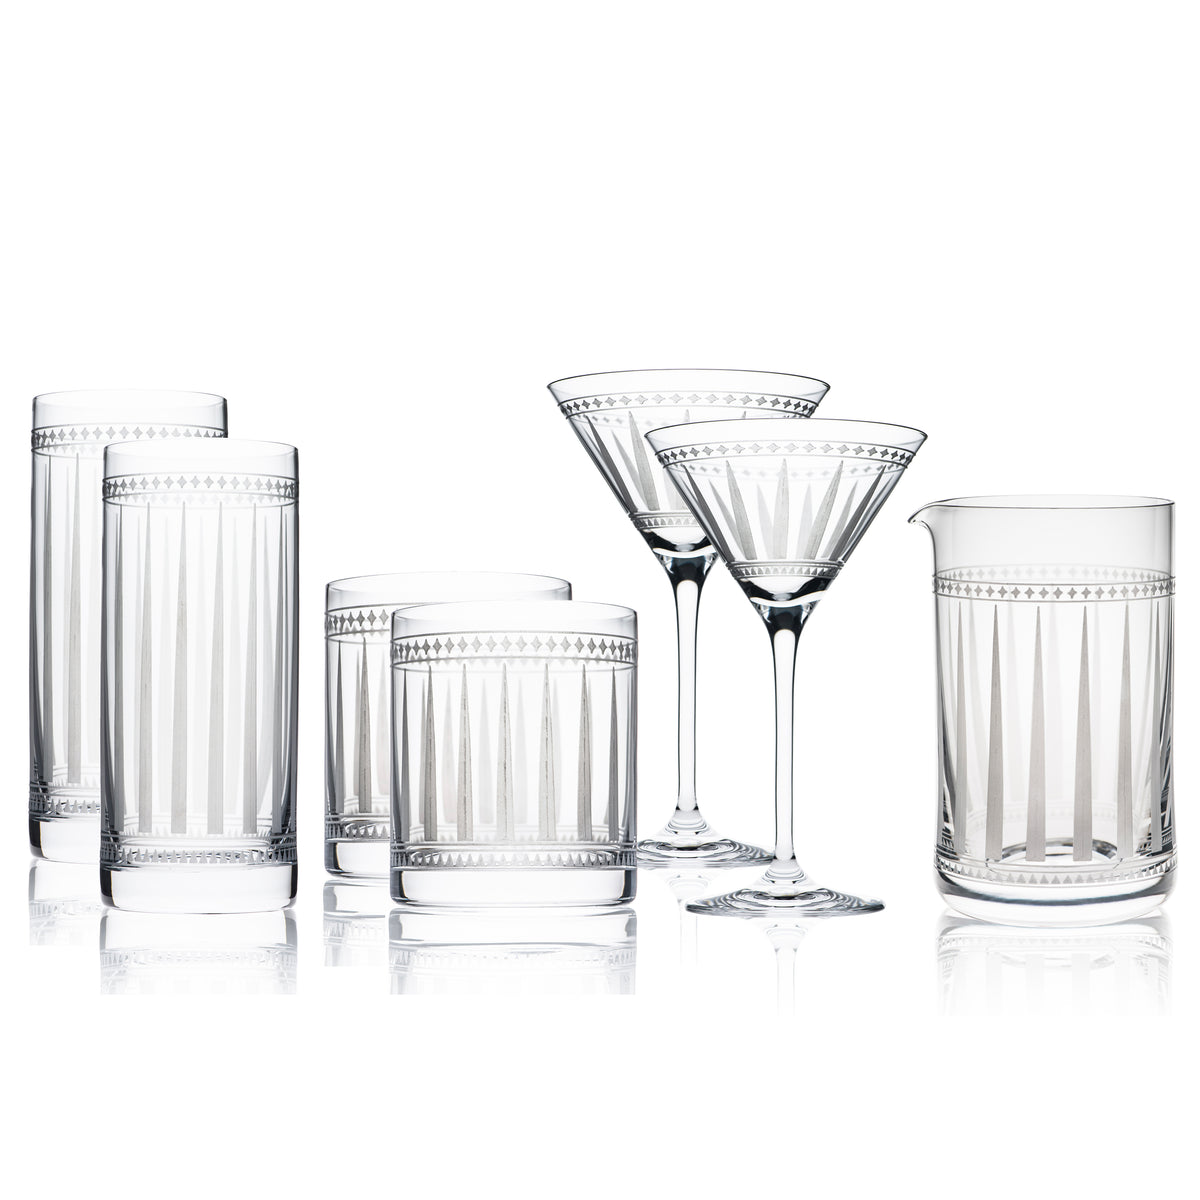 Marrakech Crystal Cocktail COllection - diamond-etched set includes 2 highball glasses, 2 on-the-rocks glasses, 2 martini glasses and a mixing glass from Caskata